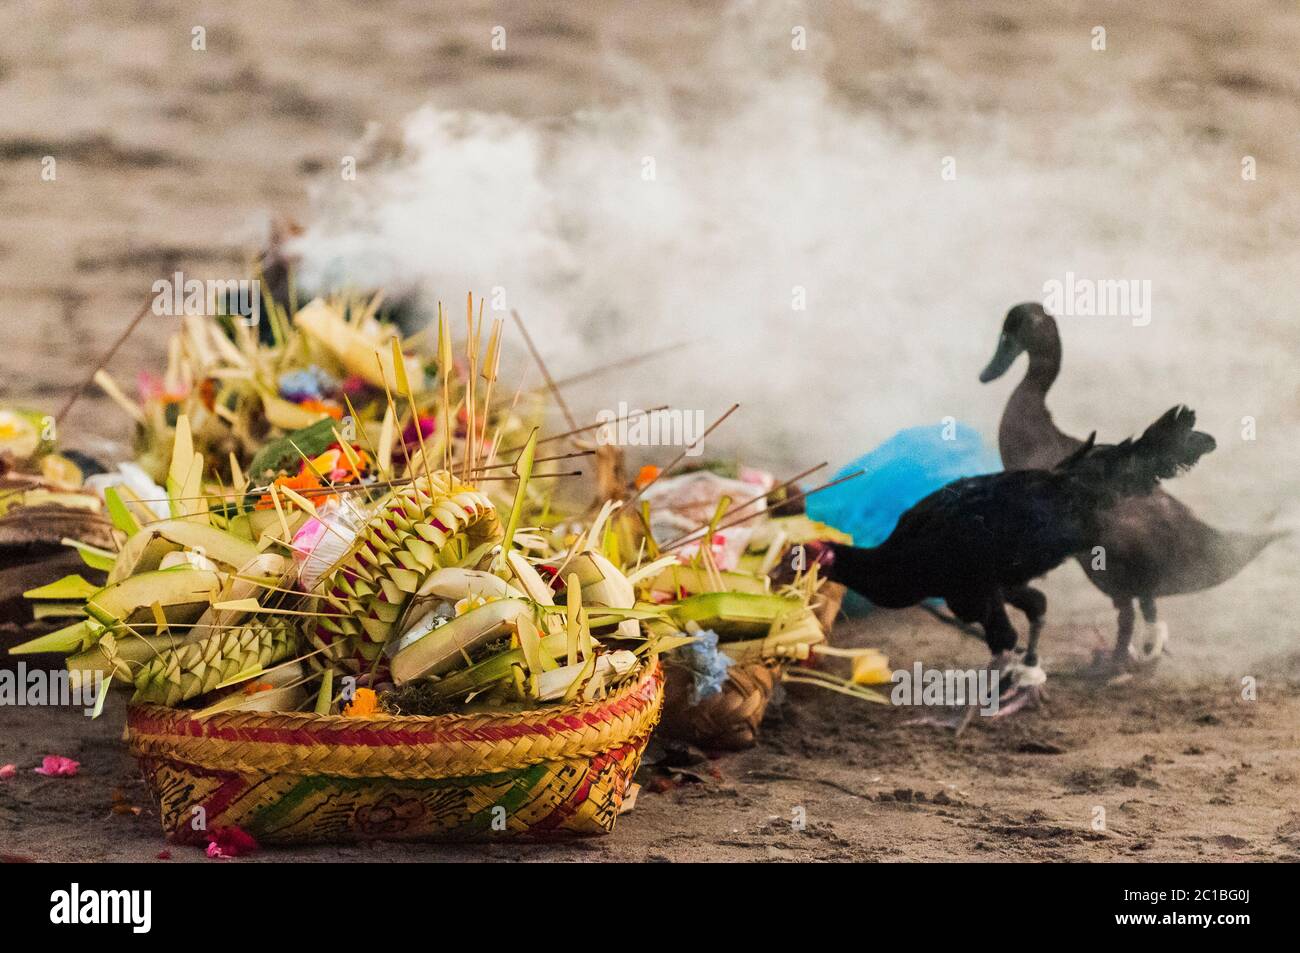 Ceremony offerings in Bali, Indonesia Stock Photo